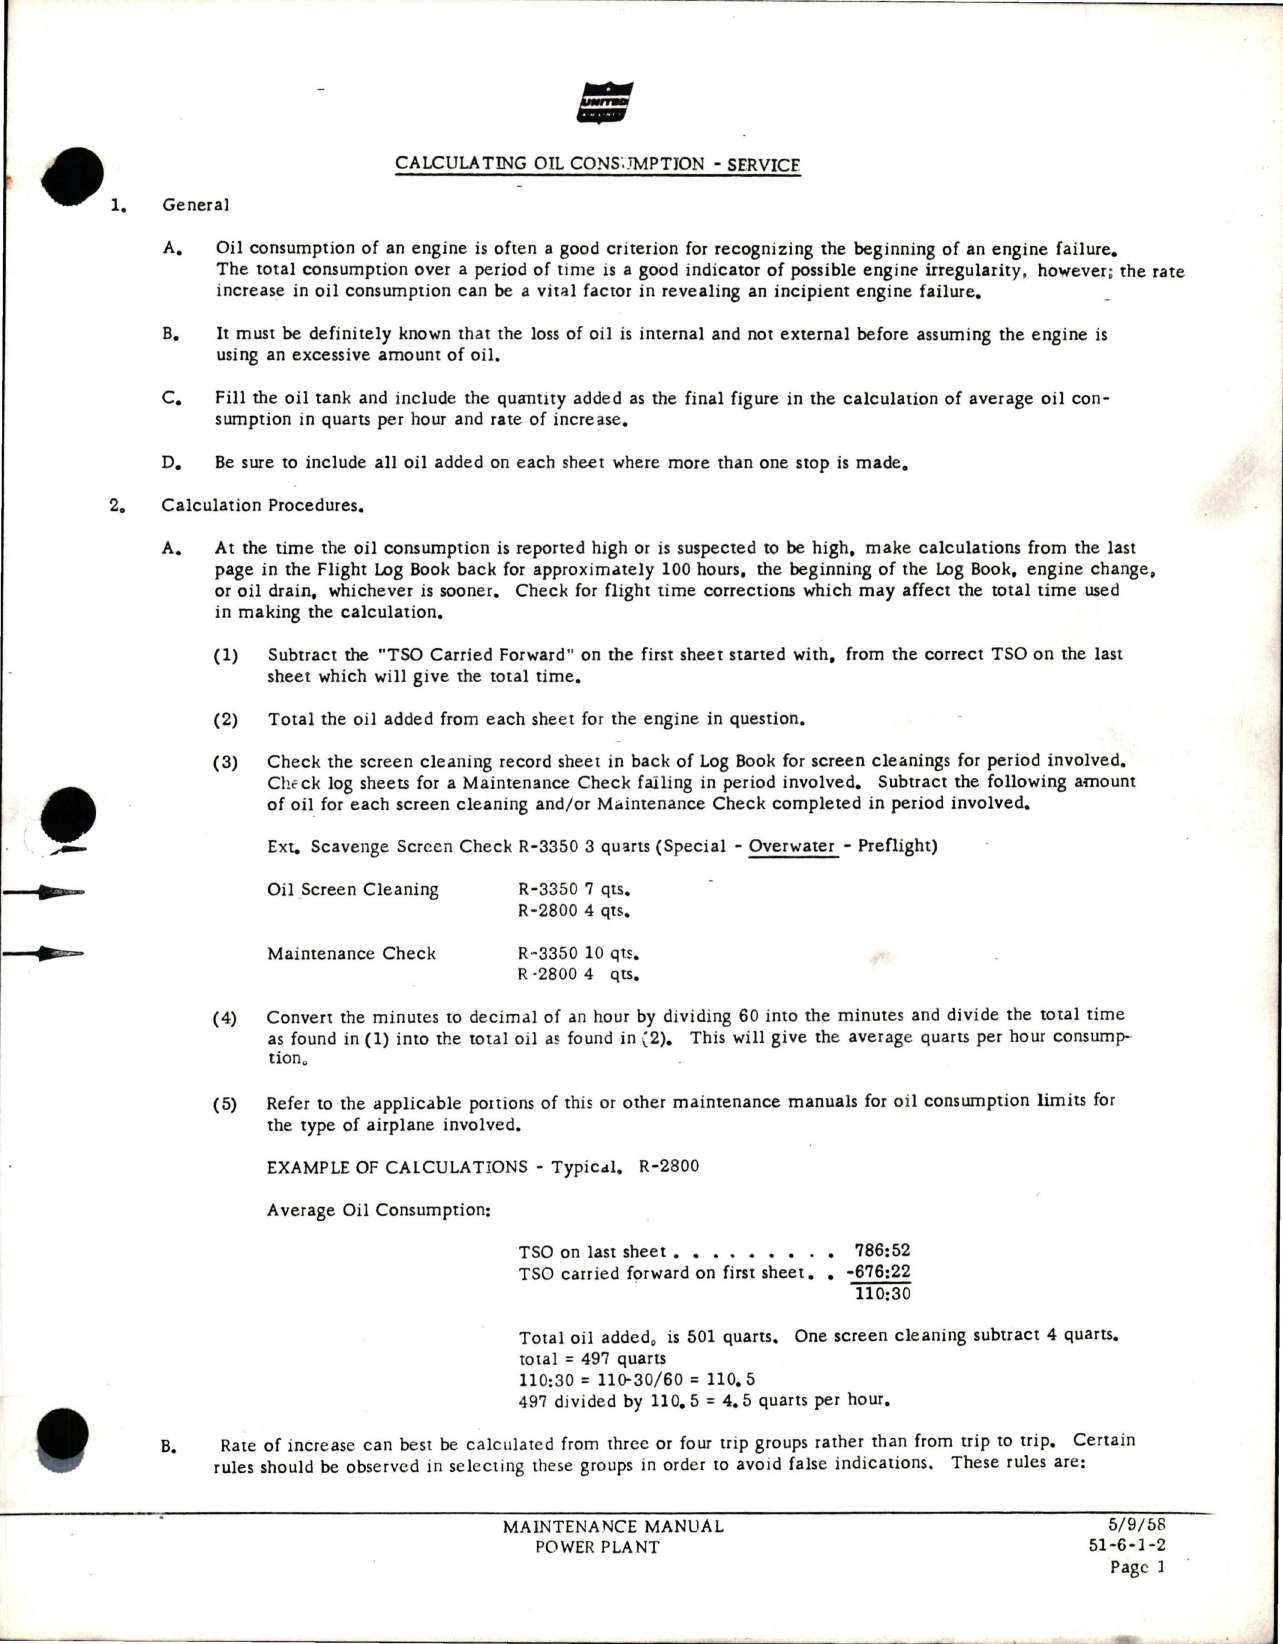 Sample page 7 from AirCorps Library document: Maintenance Manual for Power Plant - DC-6, DC-6A, DC-6B, CV-340, DC-7